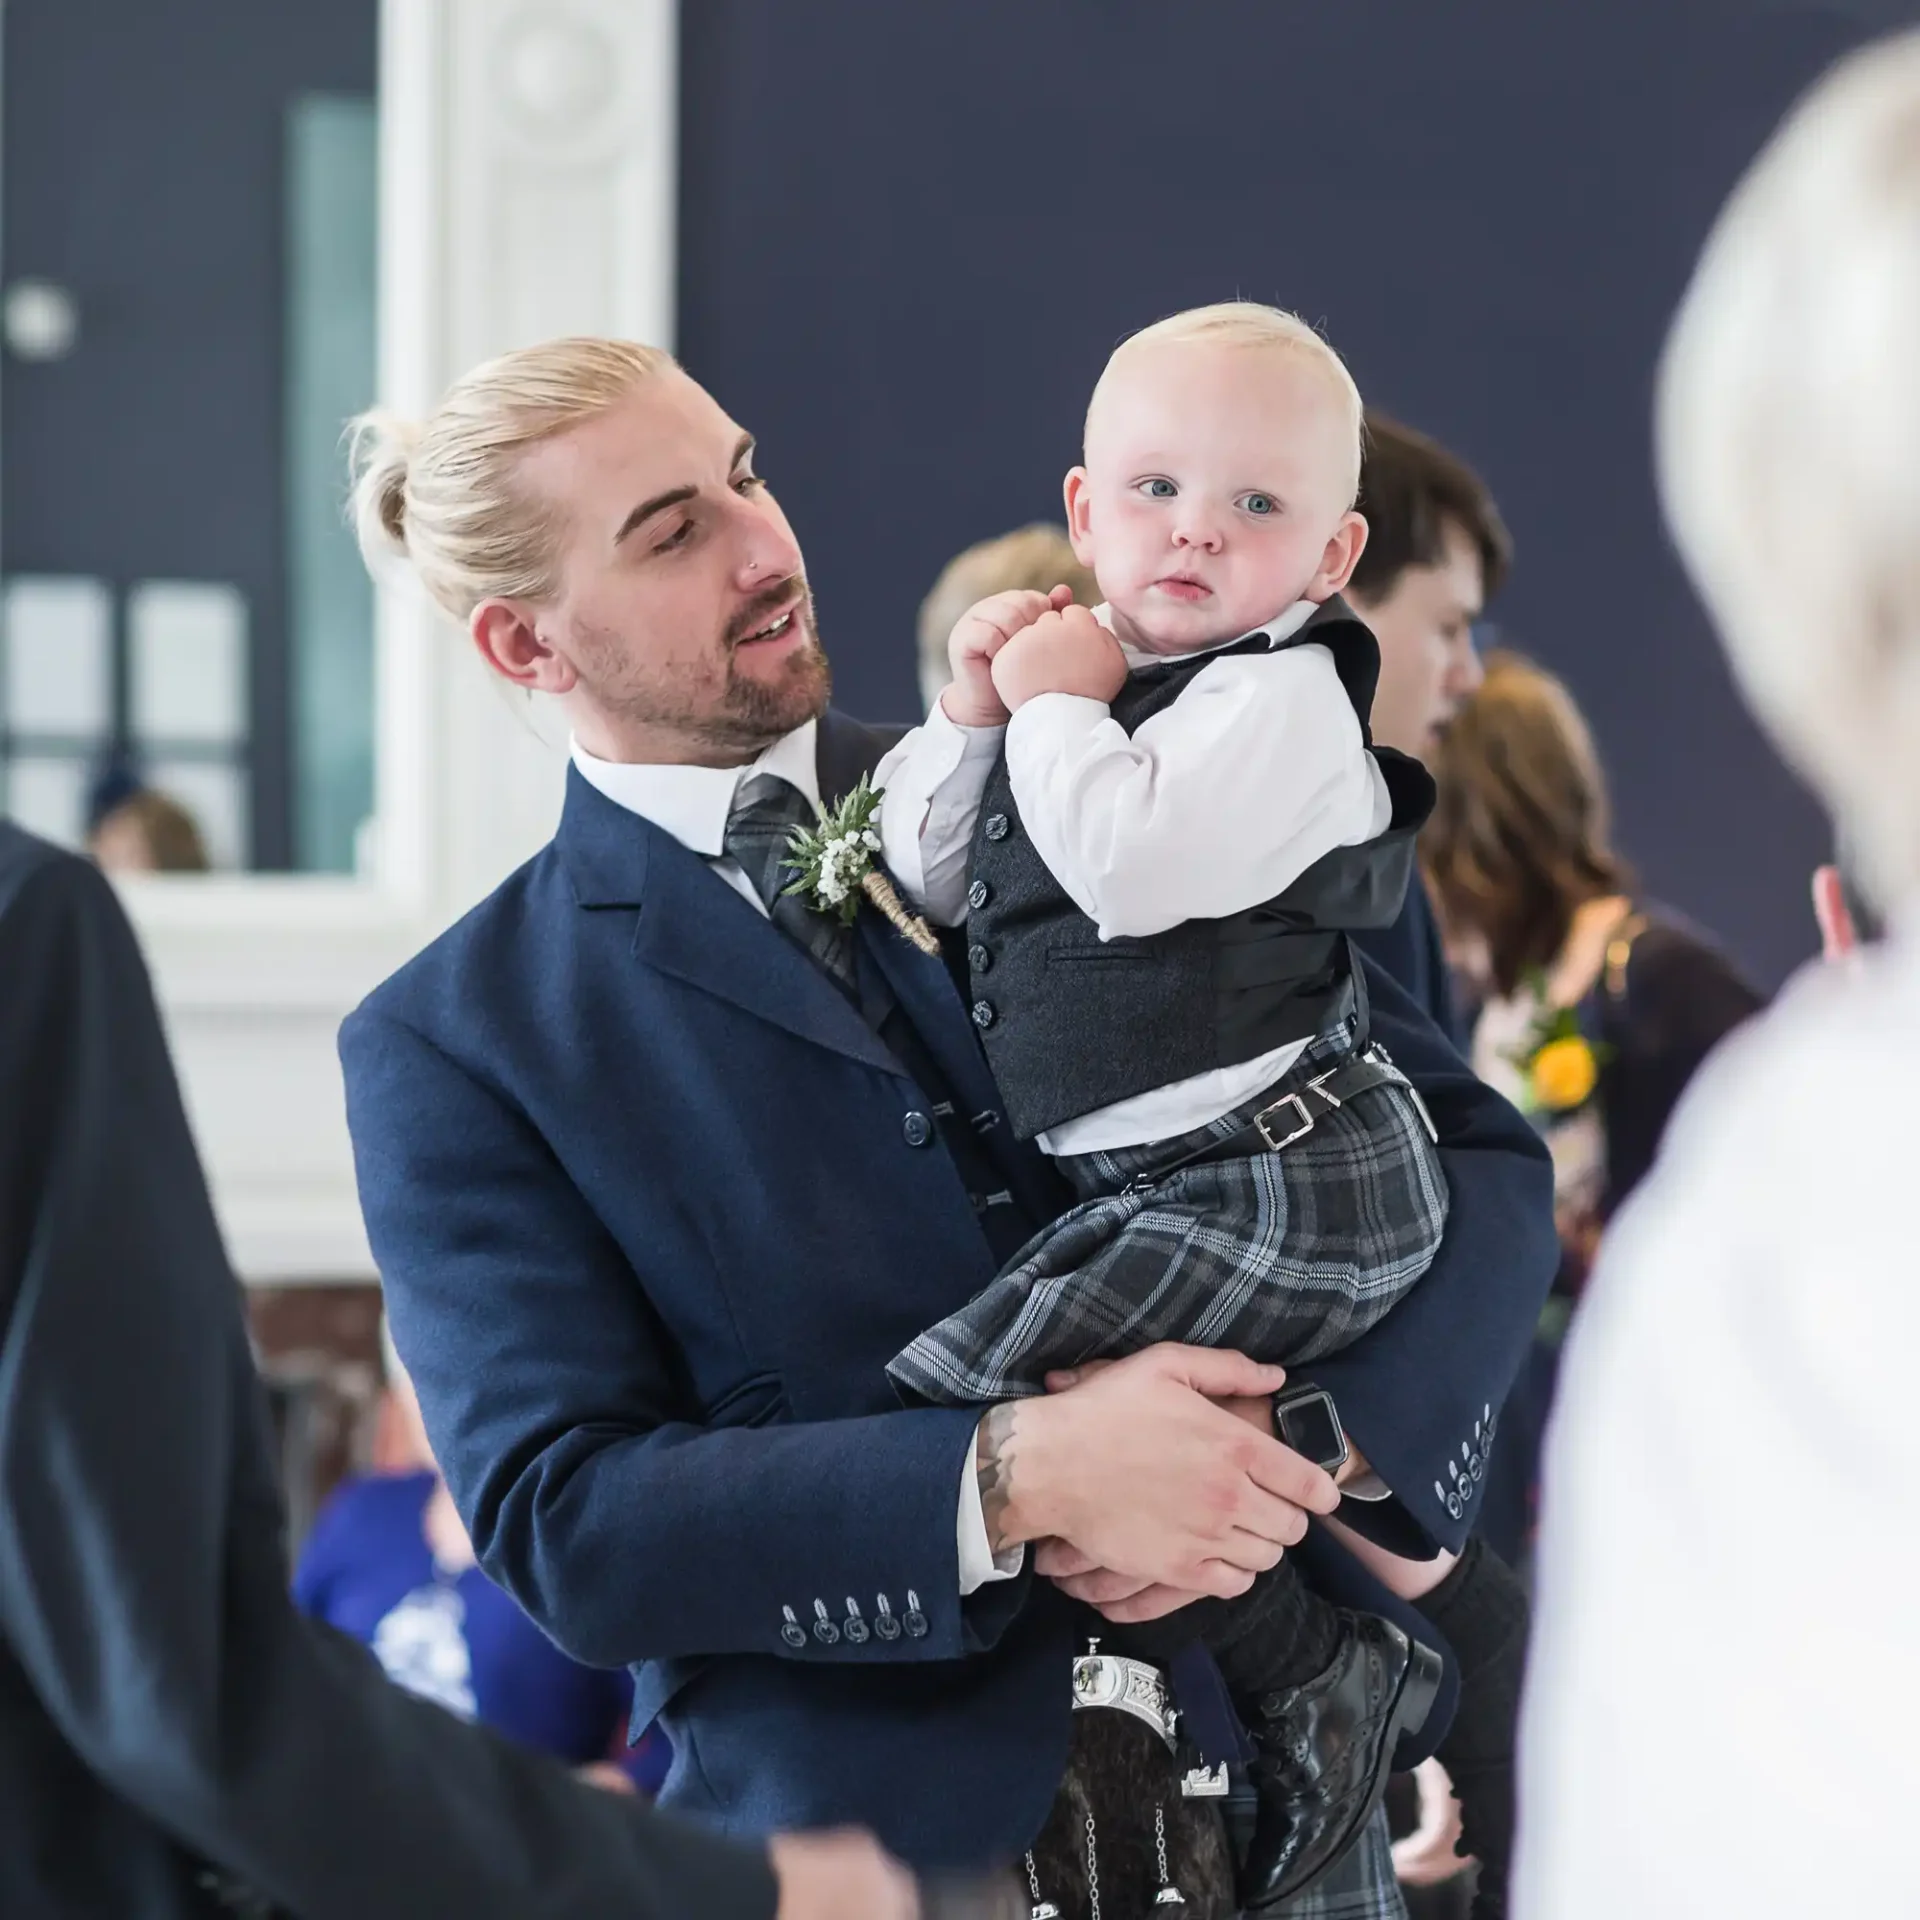 A man in a blue suit holding a baby dressed in a kilt and vest at a formal gathering.